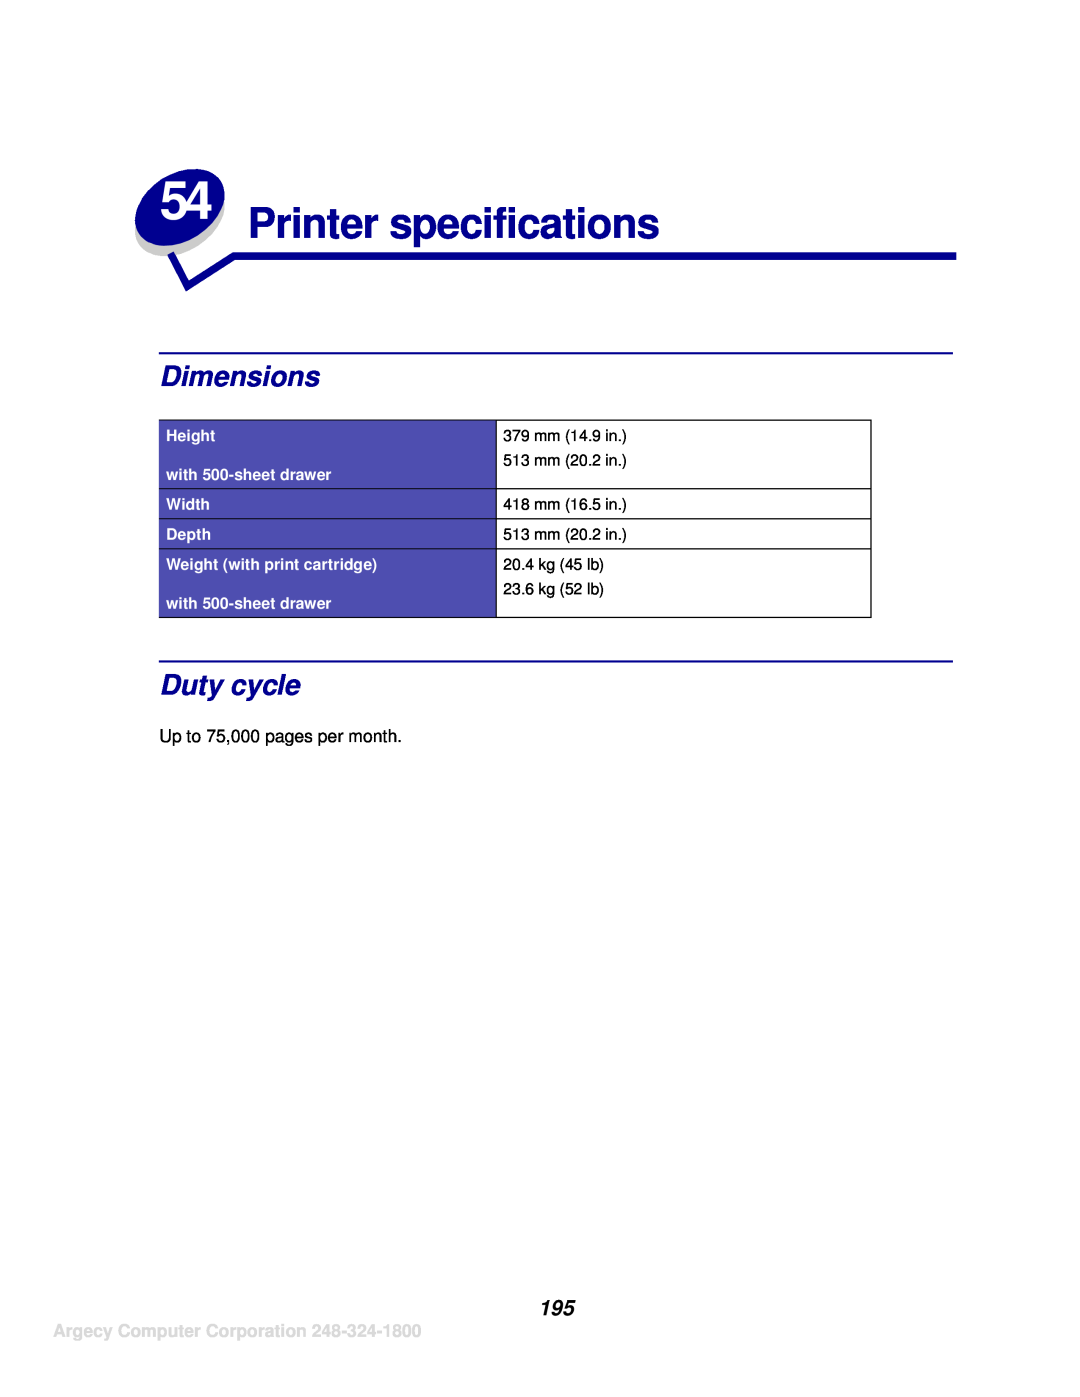 IBM 1120, 1125 manual Printer specifications, Dimensions, Duty cycle, Argecy Computer Corporation 